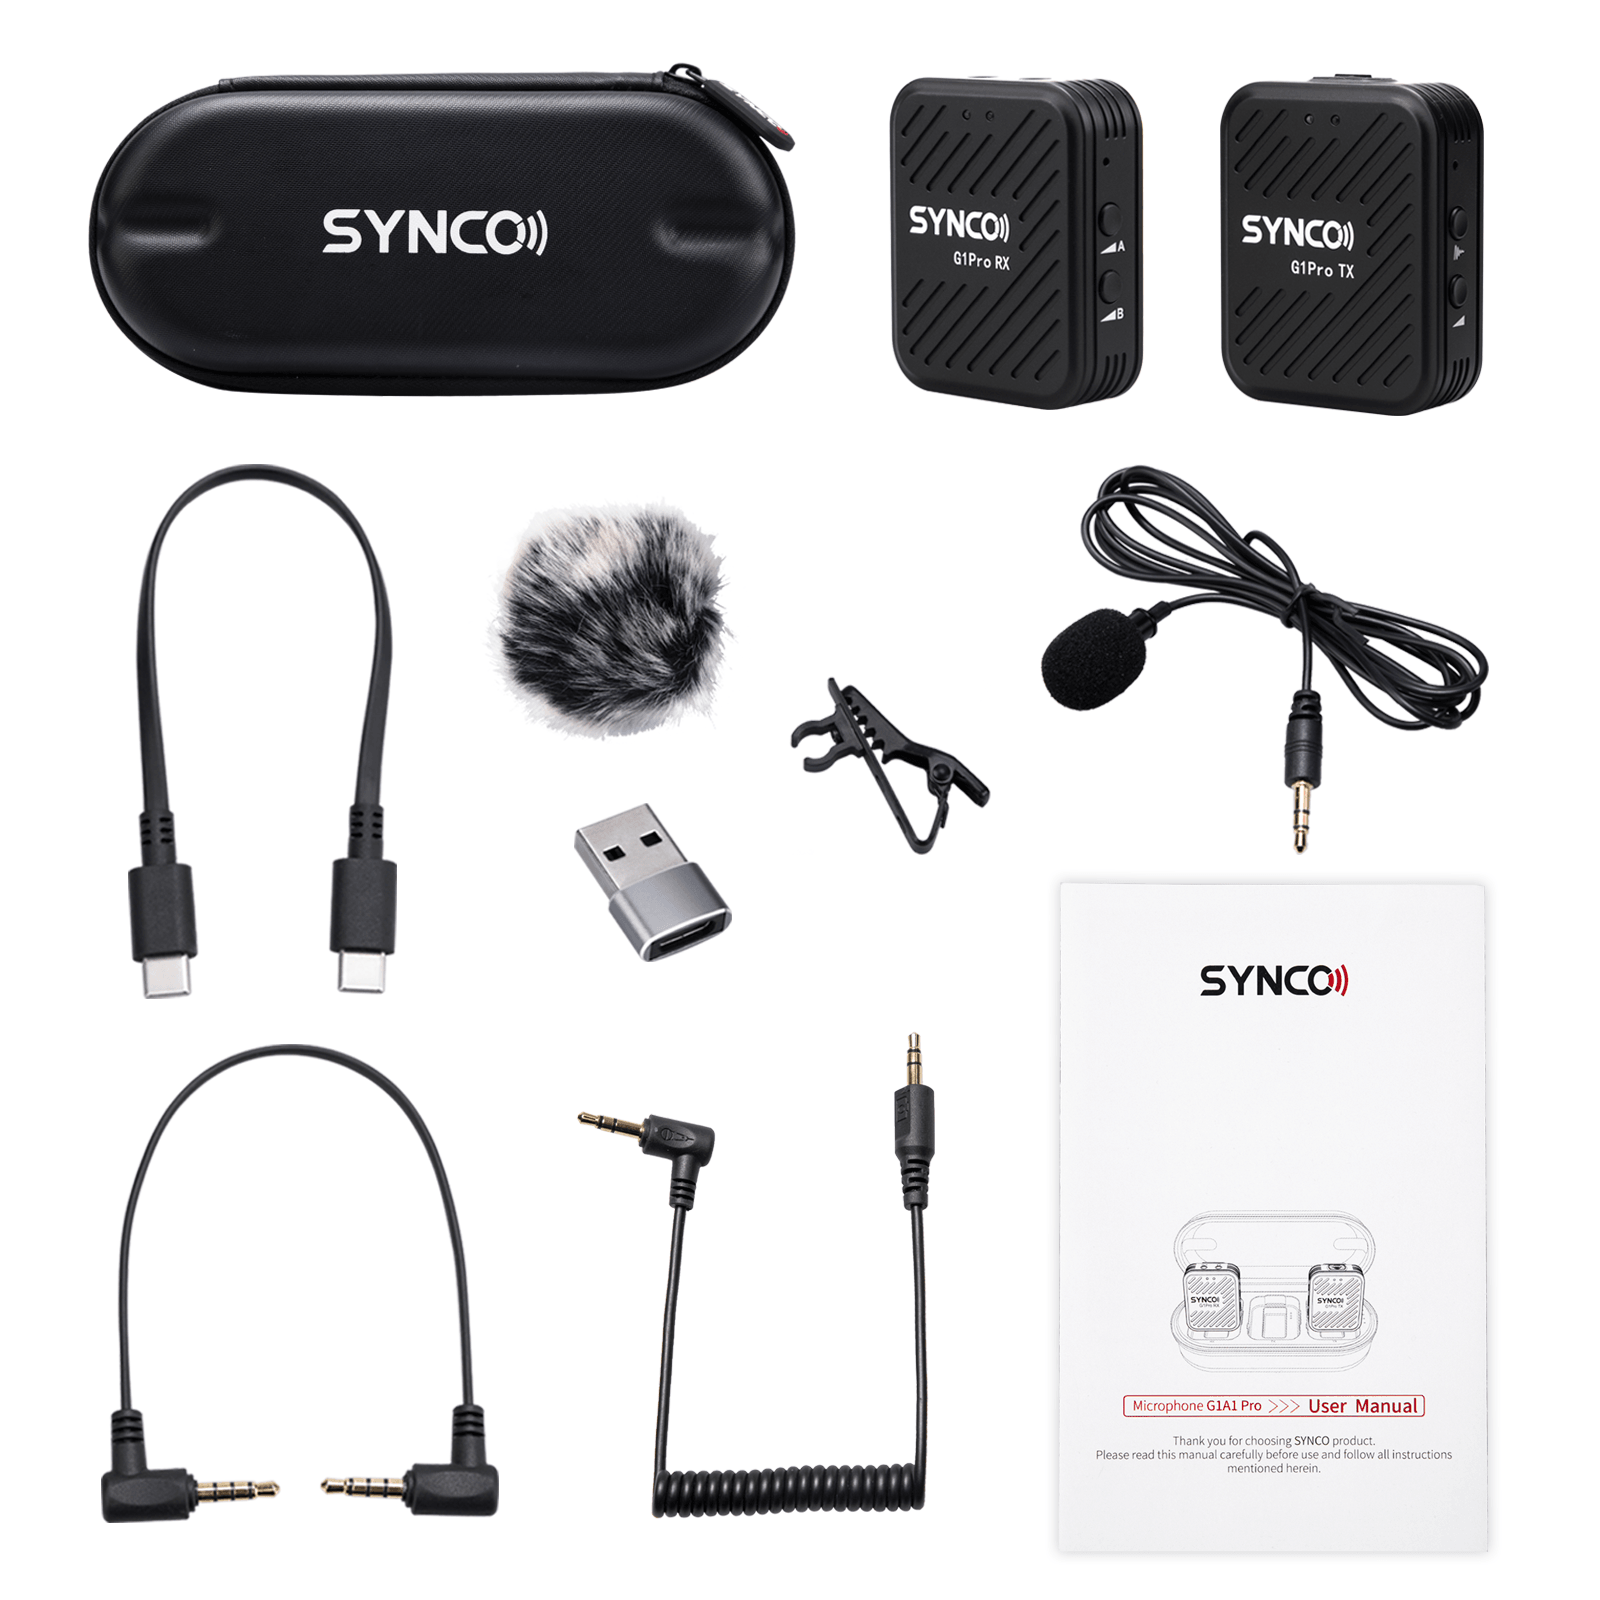 SYNCO G1A1 Pro Ultracompact Digital Wireless Lavalier Microphone